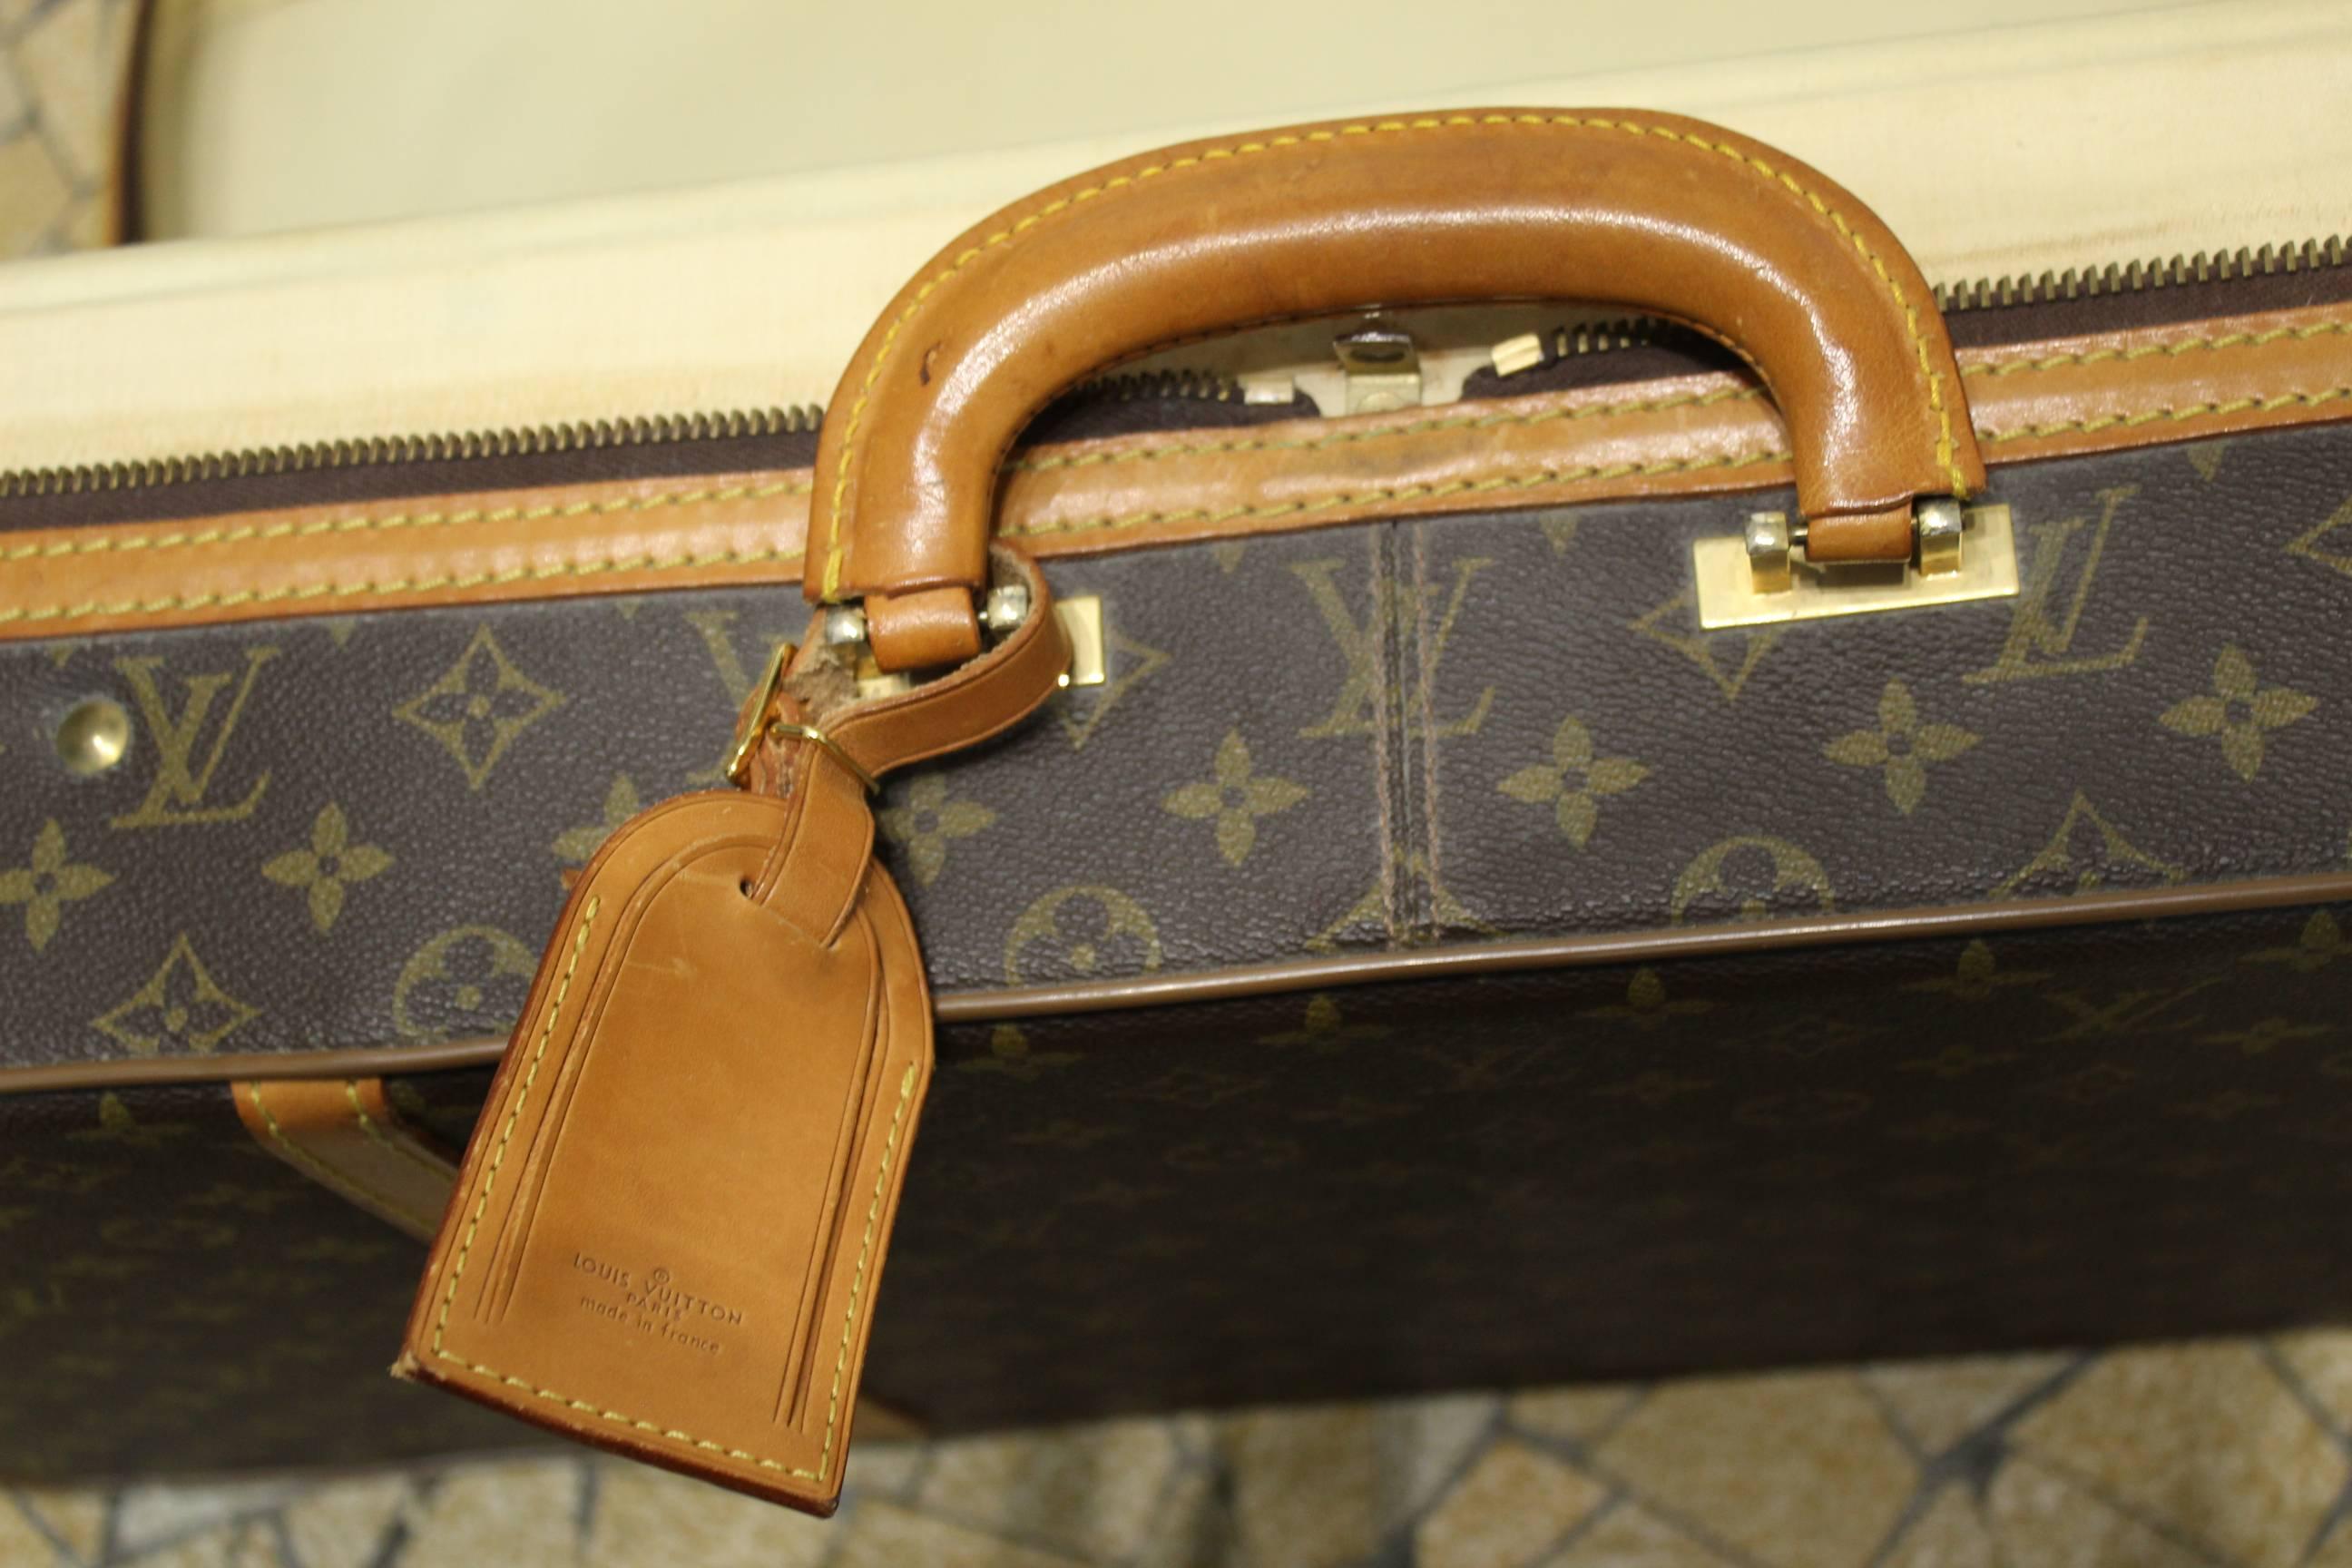 For sale an stunnig Louis Vuitton semi rigid bag for Badmington  raquets but that can be used for other purposed now.

really good condition for a vintage piece.

One outter pocket.

With lock 

size:72x32 cm